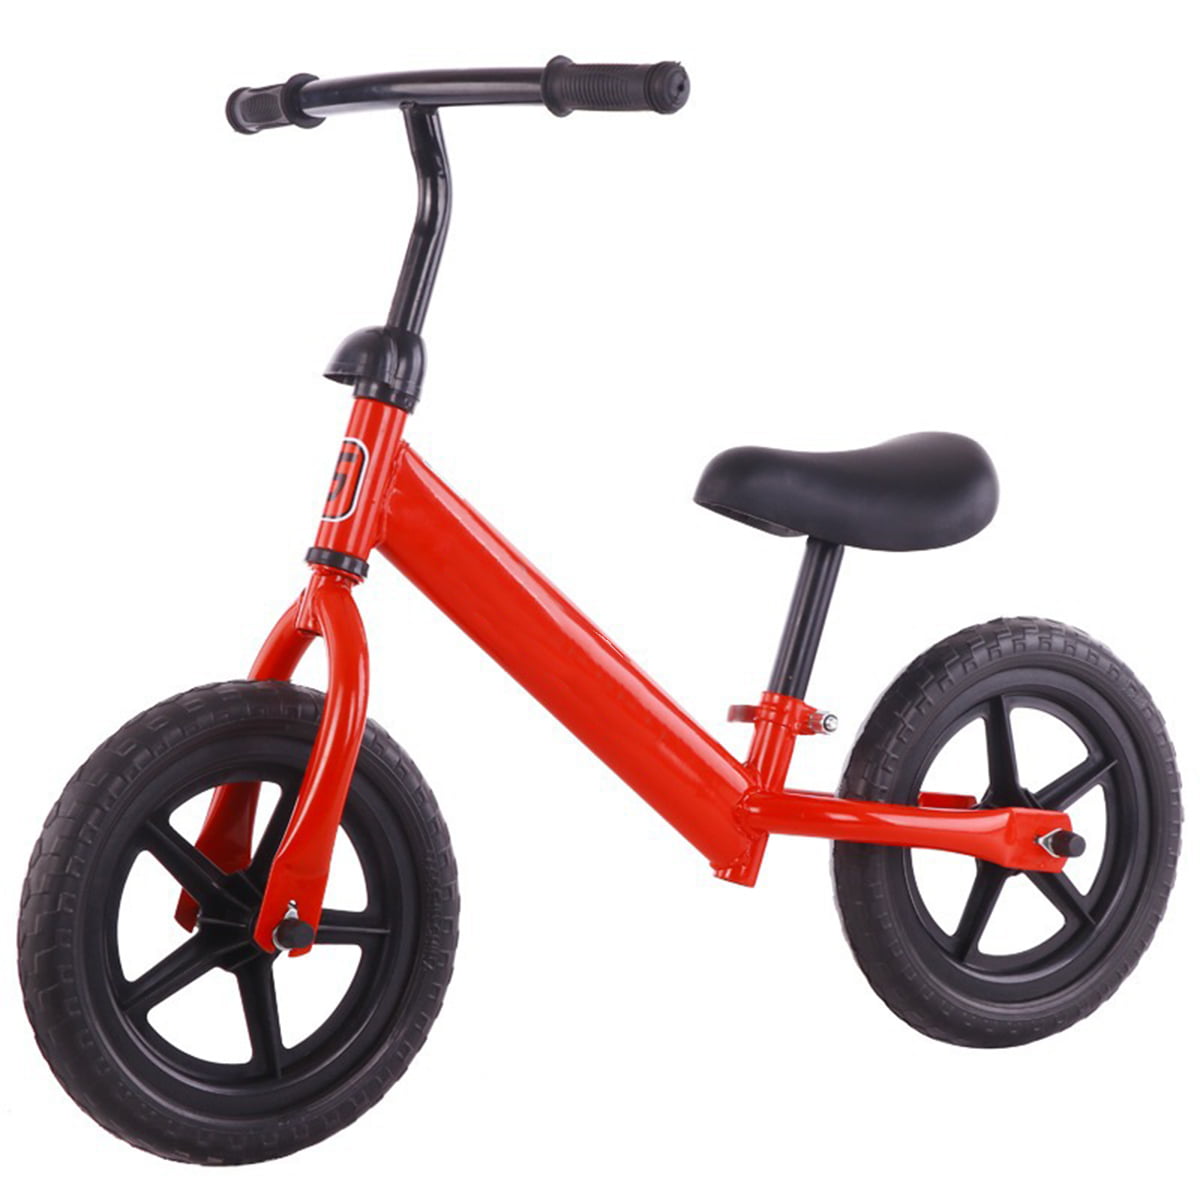 Kids Balance Bike Walker Childs Training Bicycle Toy Non-Pedal w/Adujstable Seat 